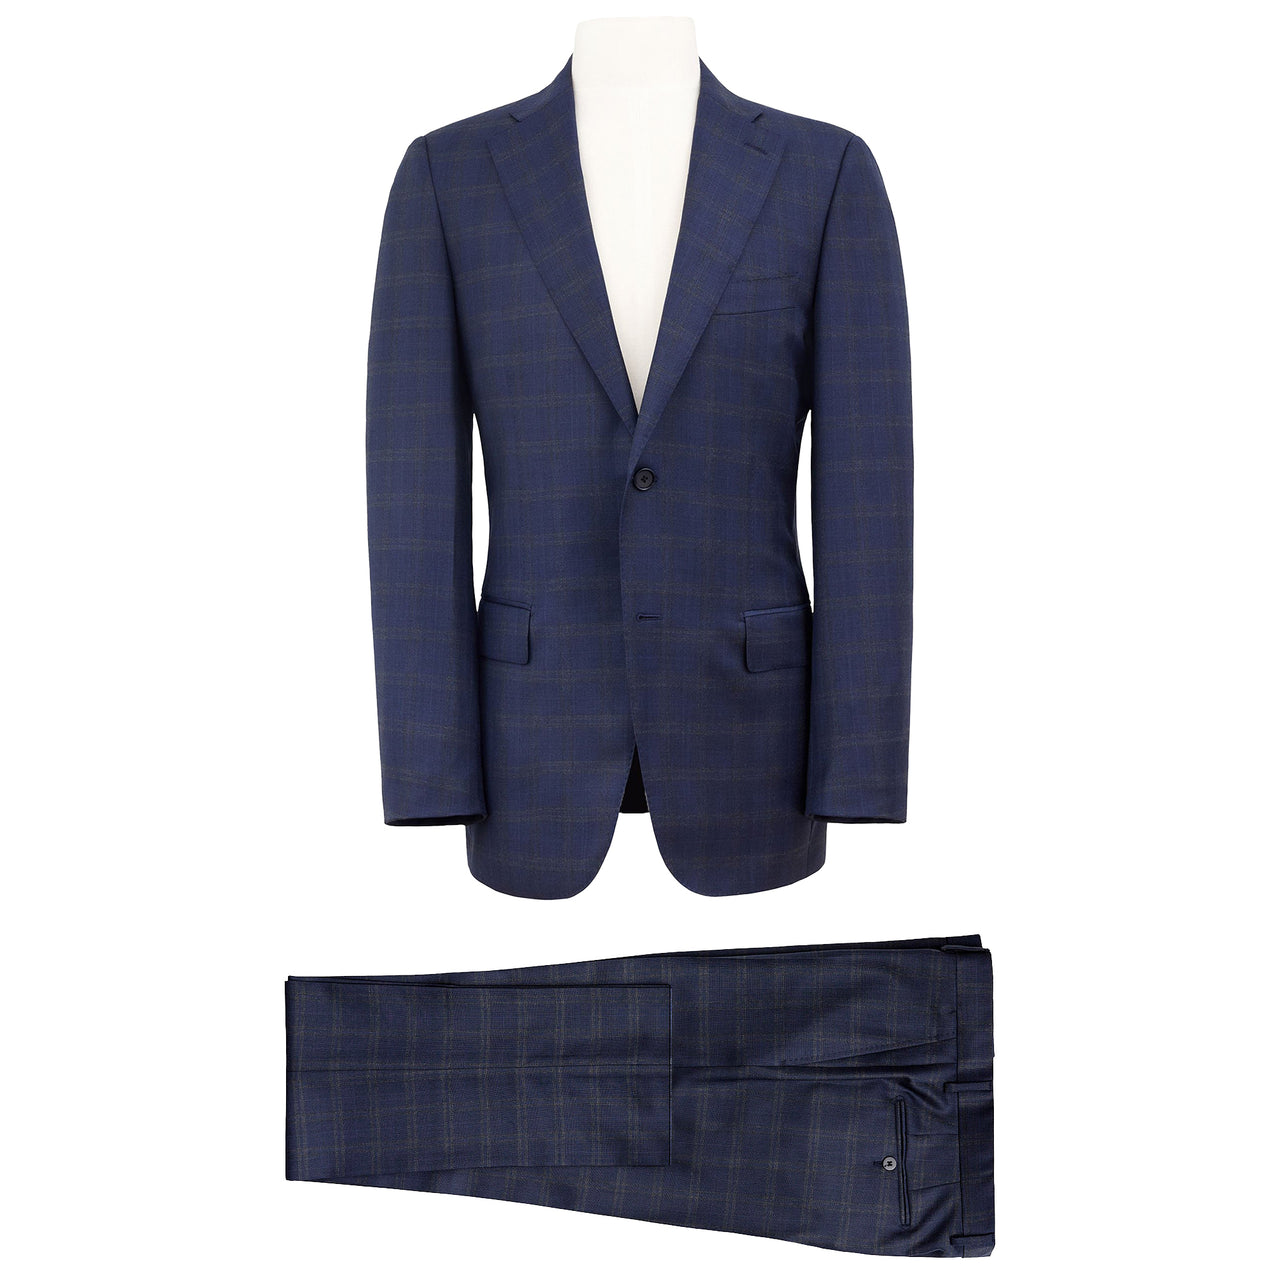 HENRY SARTORIAL x DORMEUIL Check Suit NAVY/BLUE